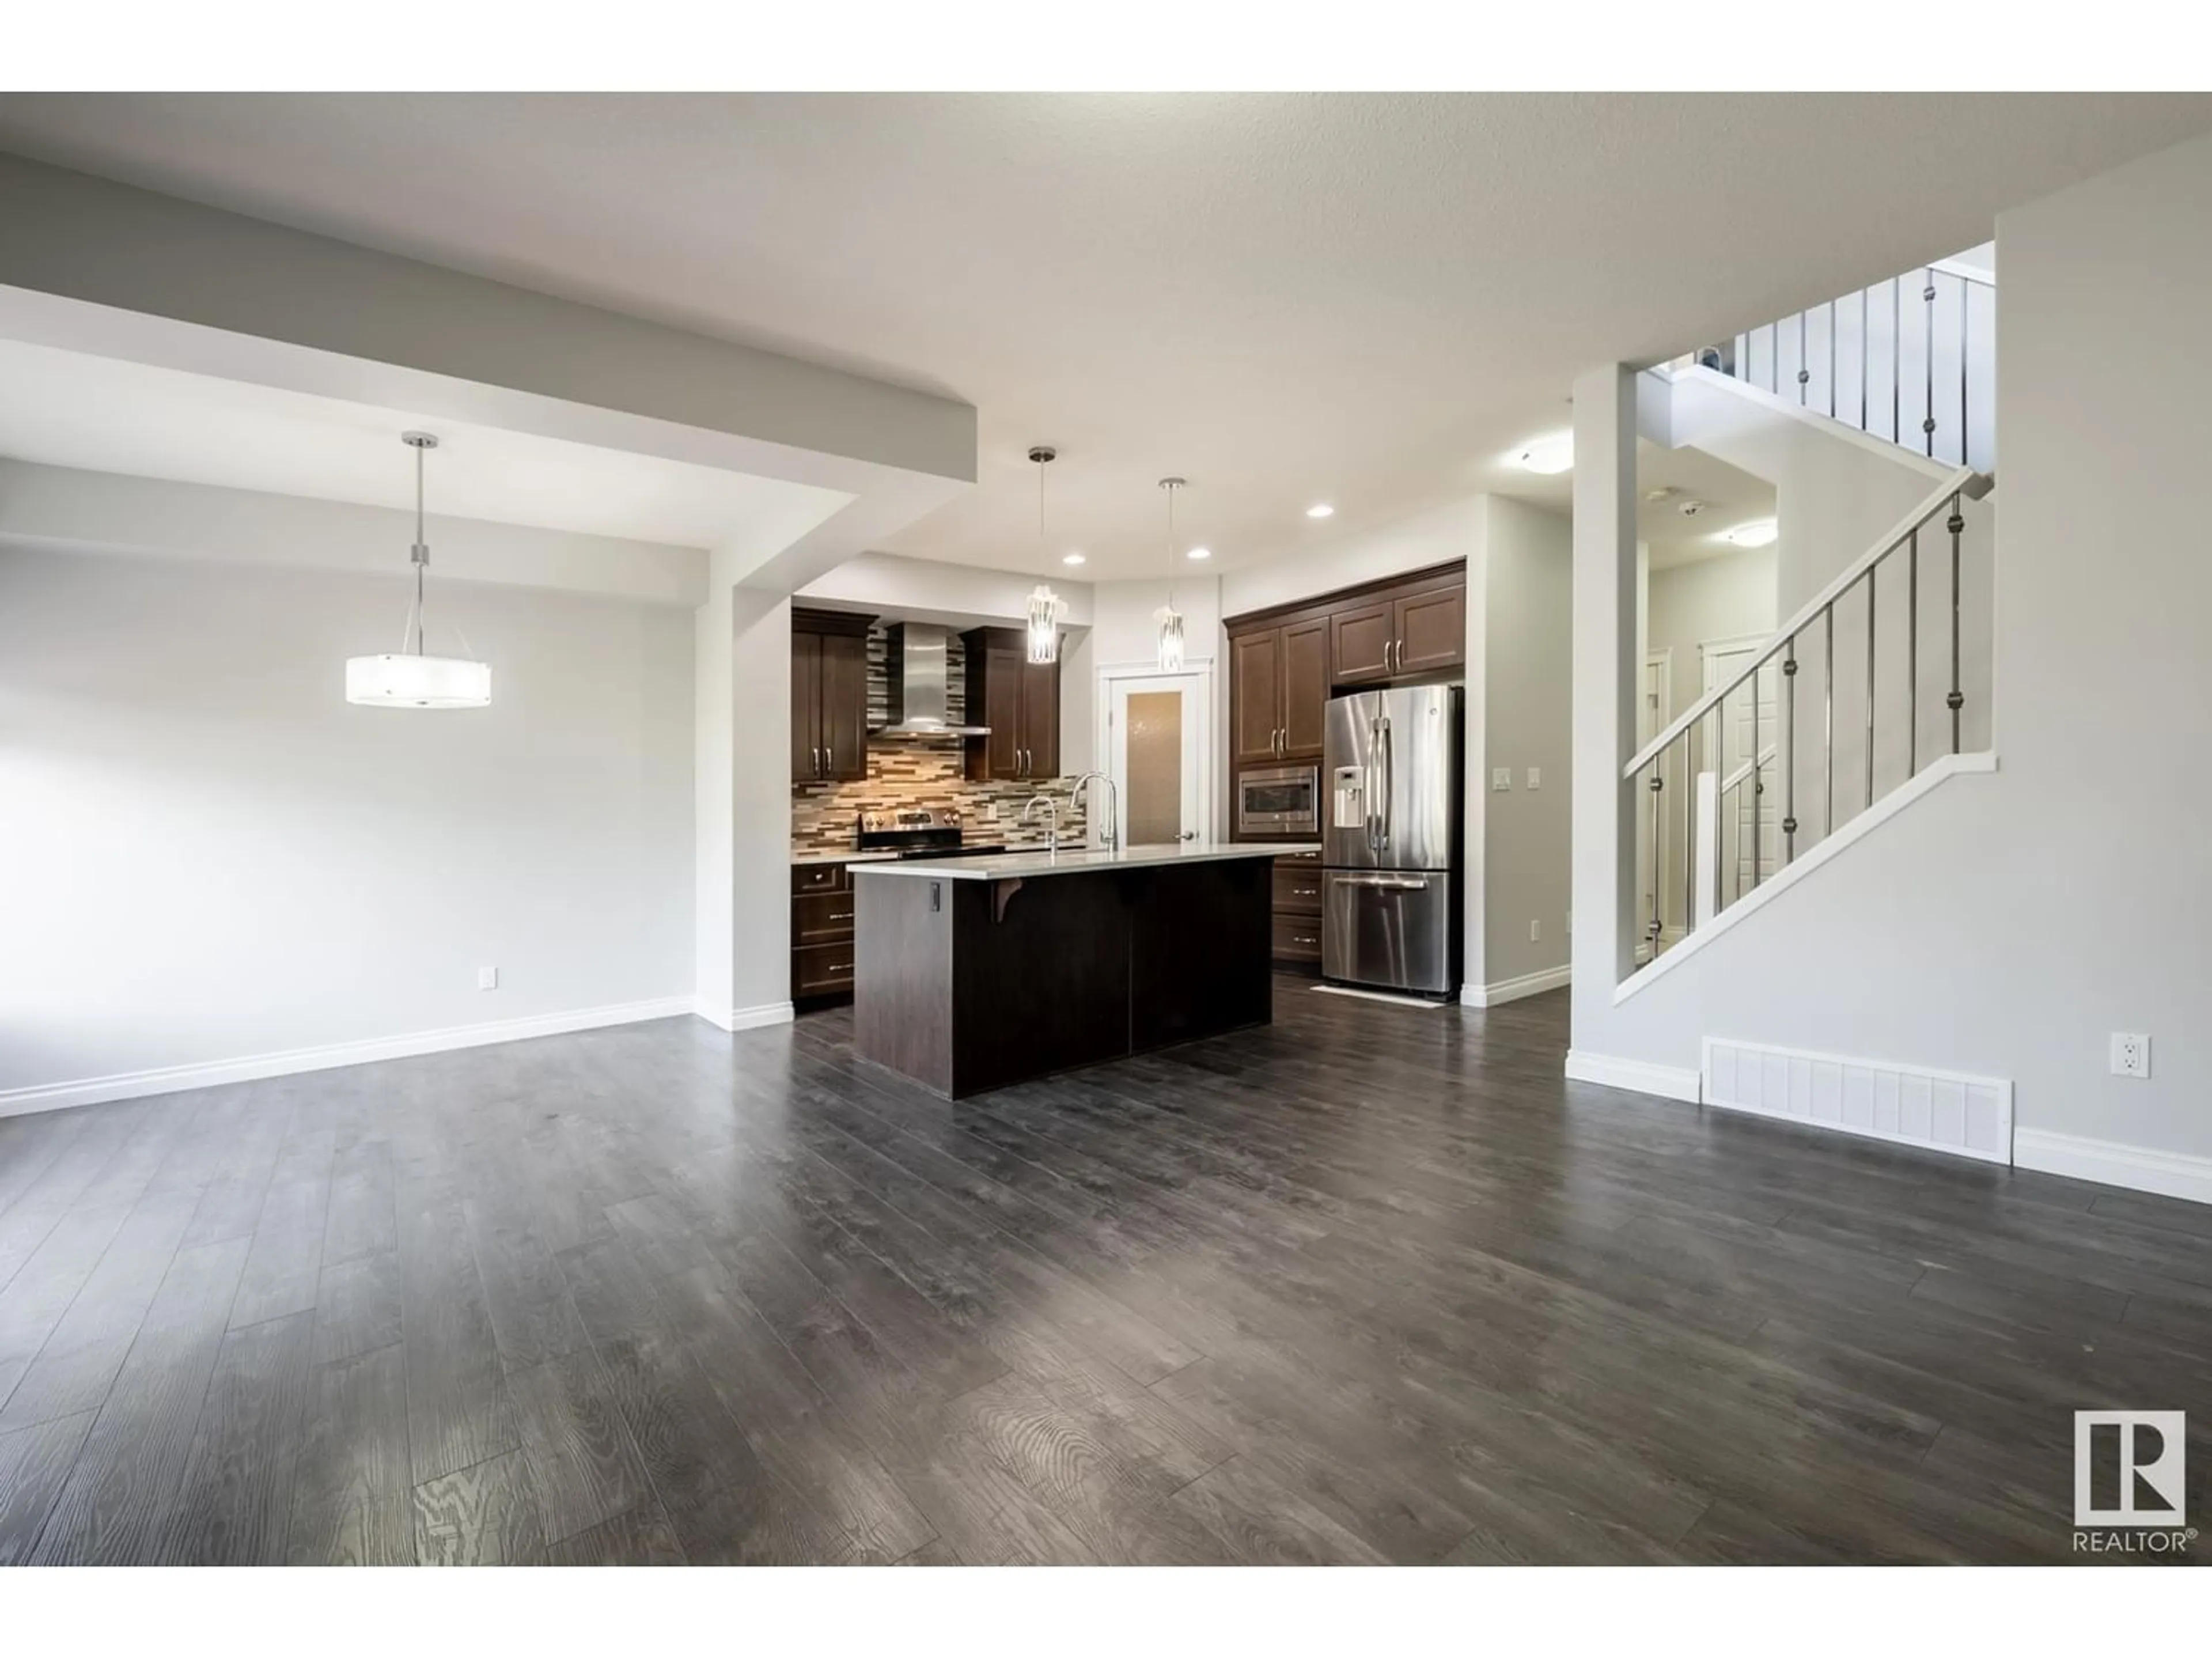 Contemporary kitchen for 8120 225 ST NW, Edmonton Alberta T5T7G6